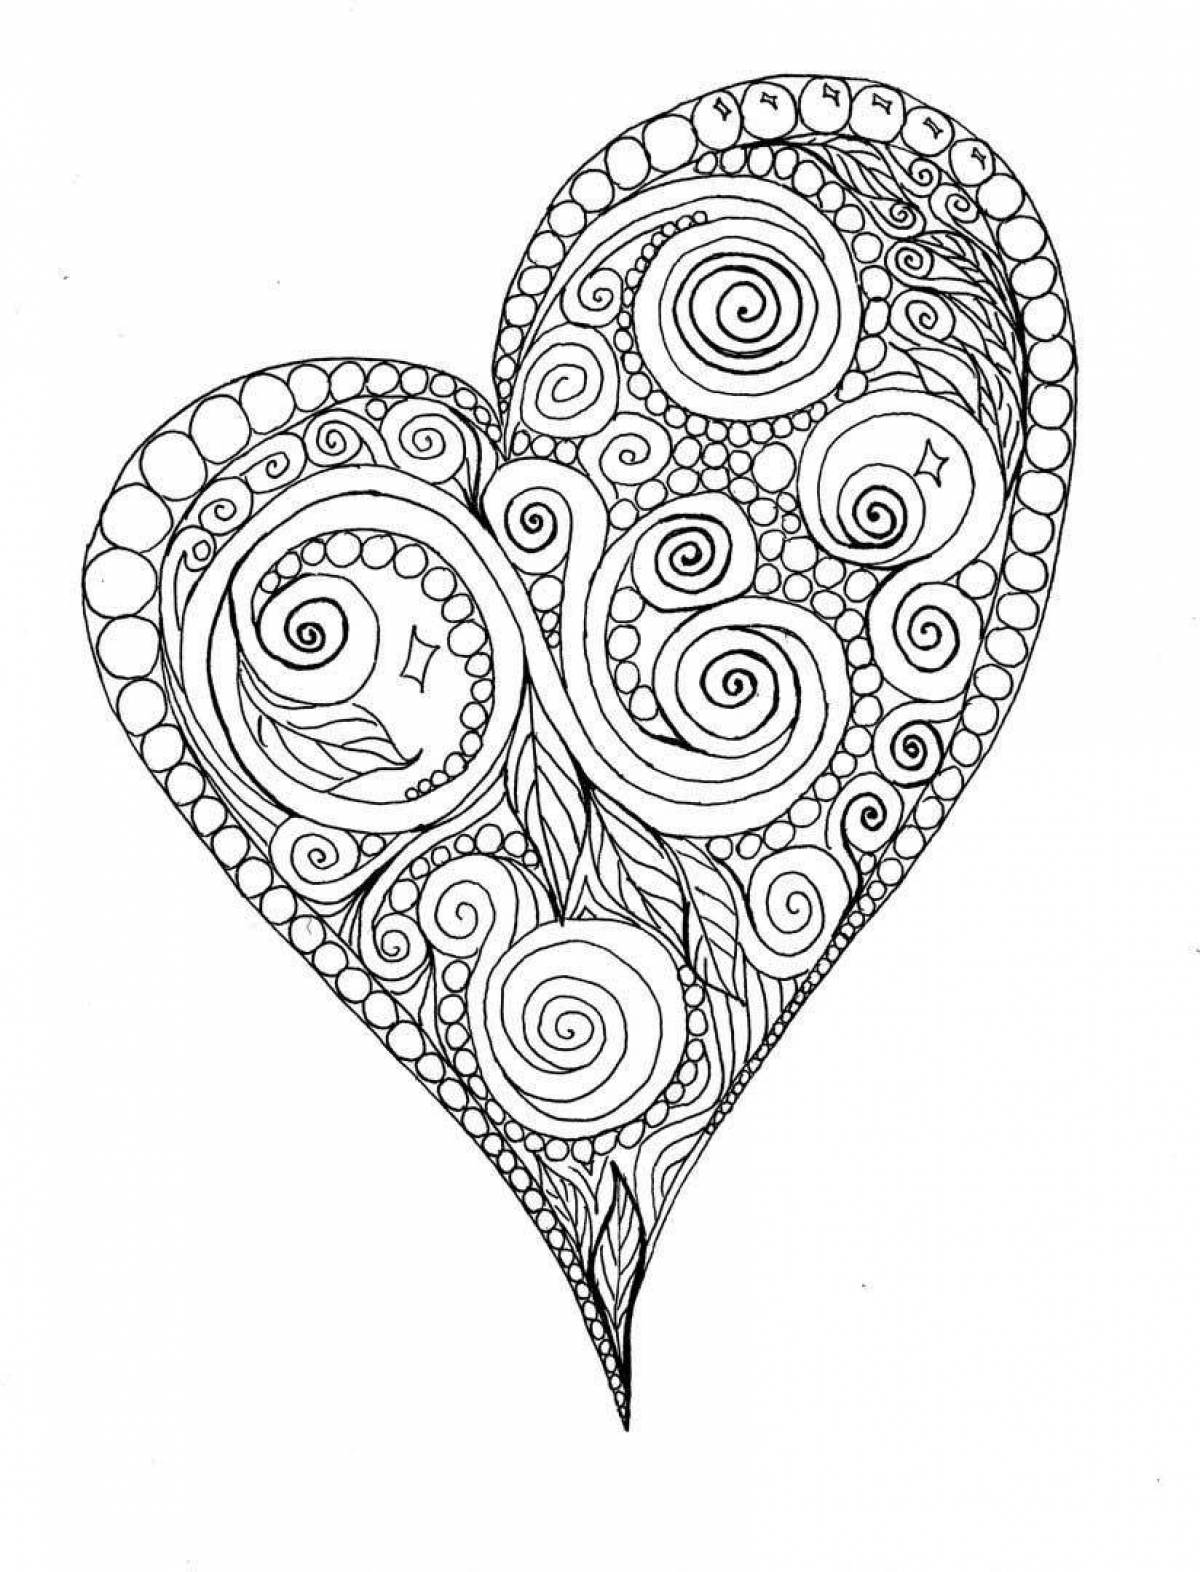 Coloring book dazzling heart